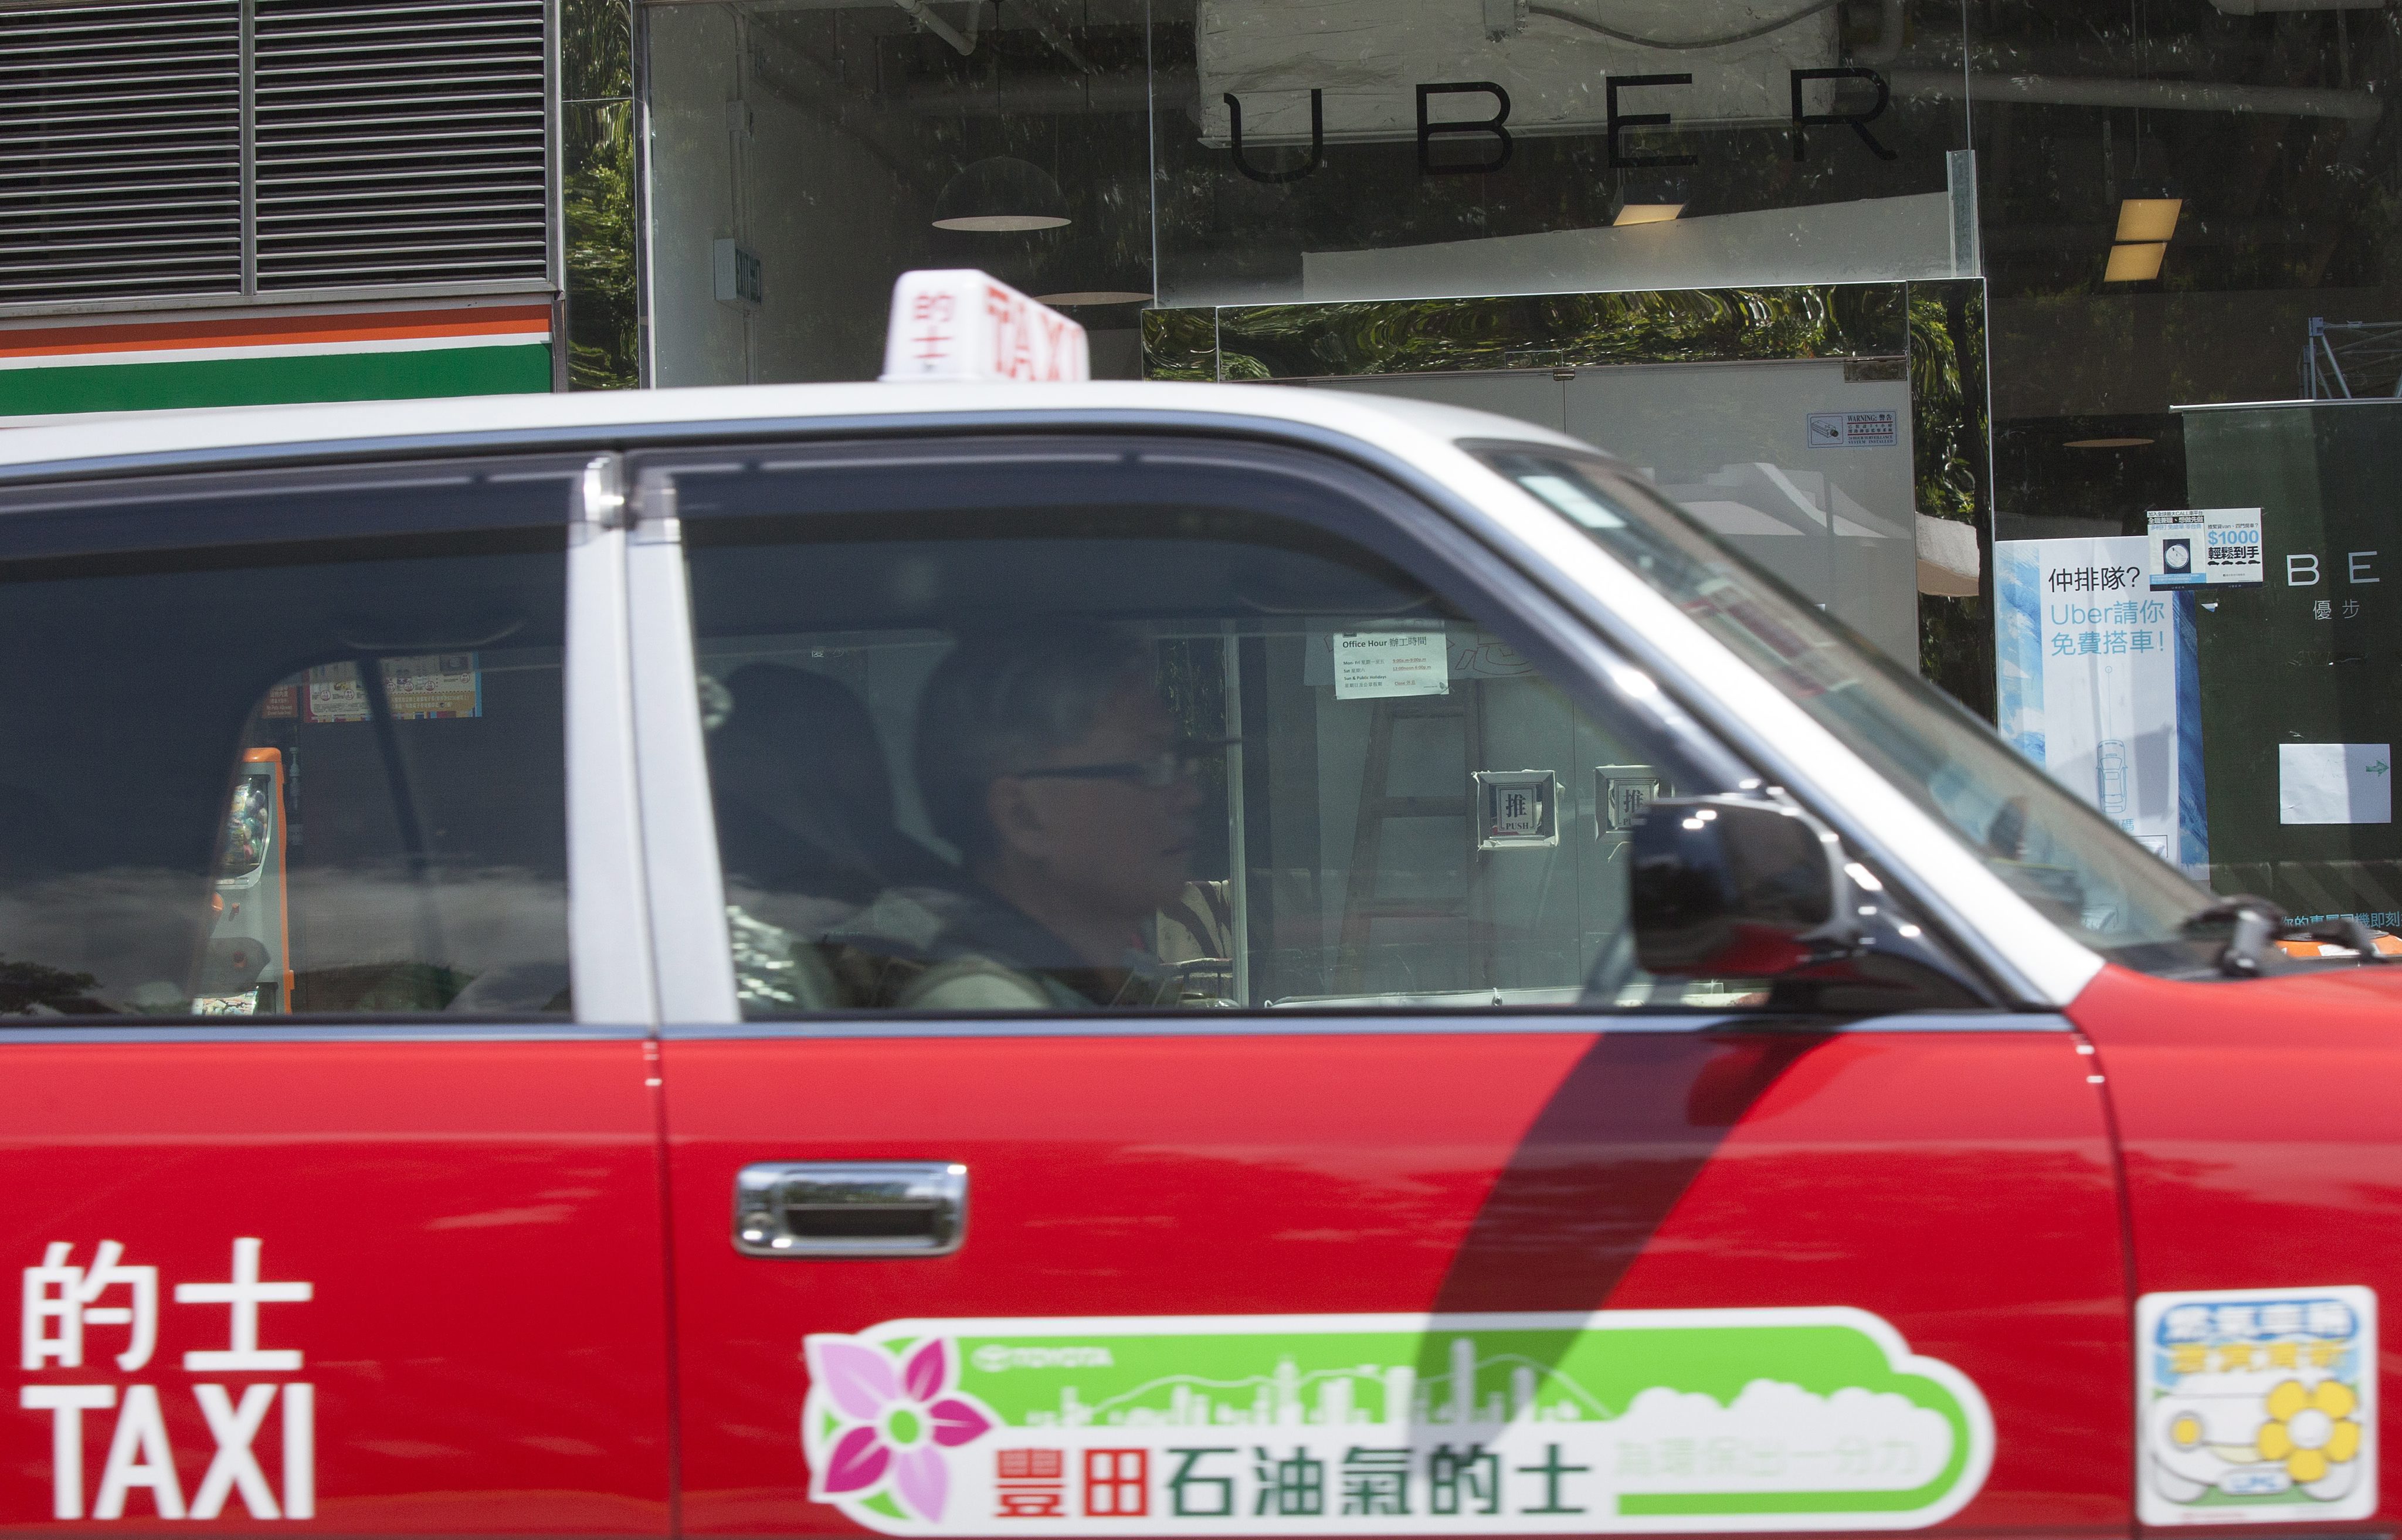 The traditional taxi industry and car-hailing-app companies like Uber are complementary and can co-exist. Photo: EPA